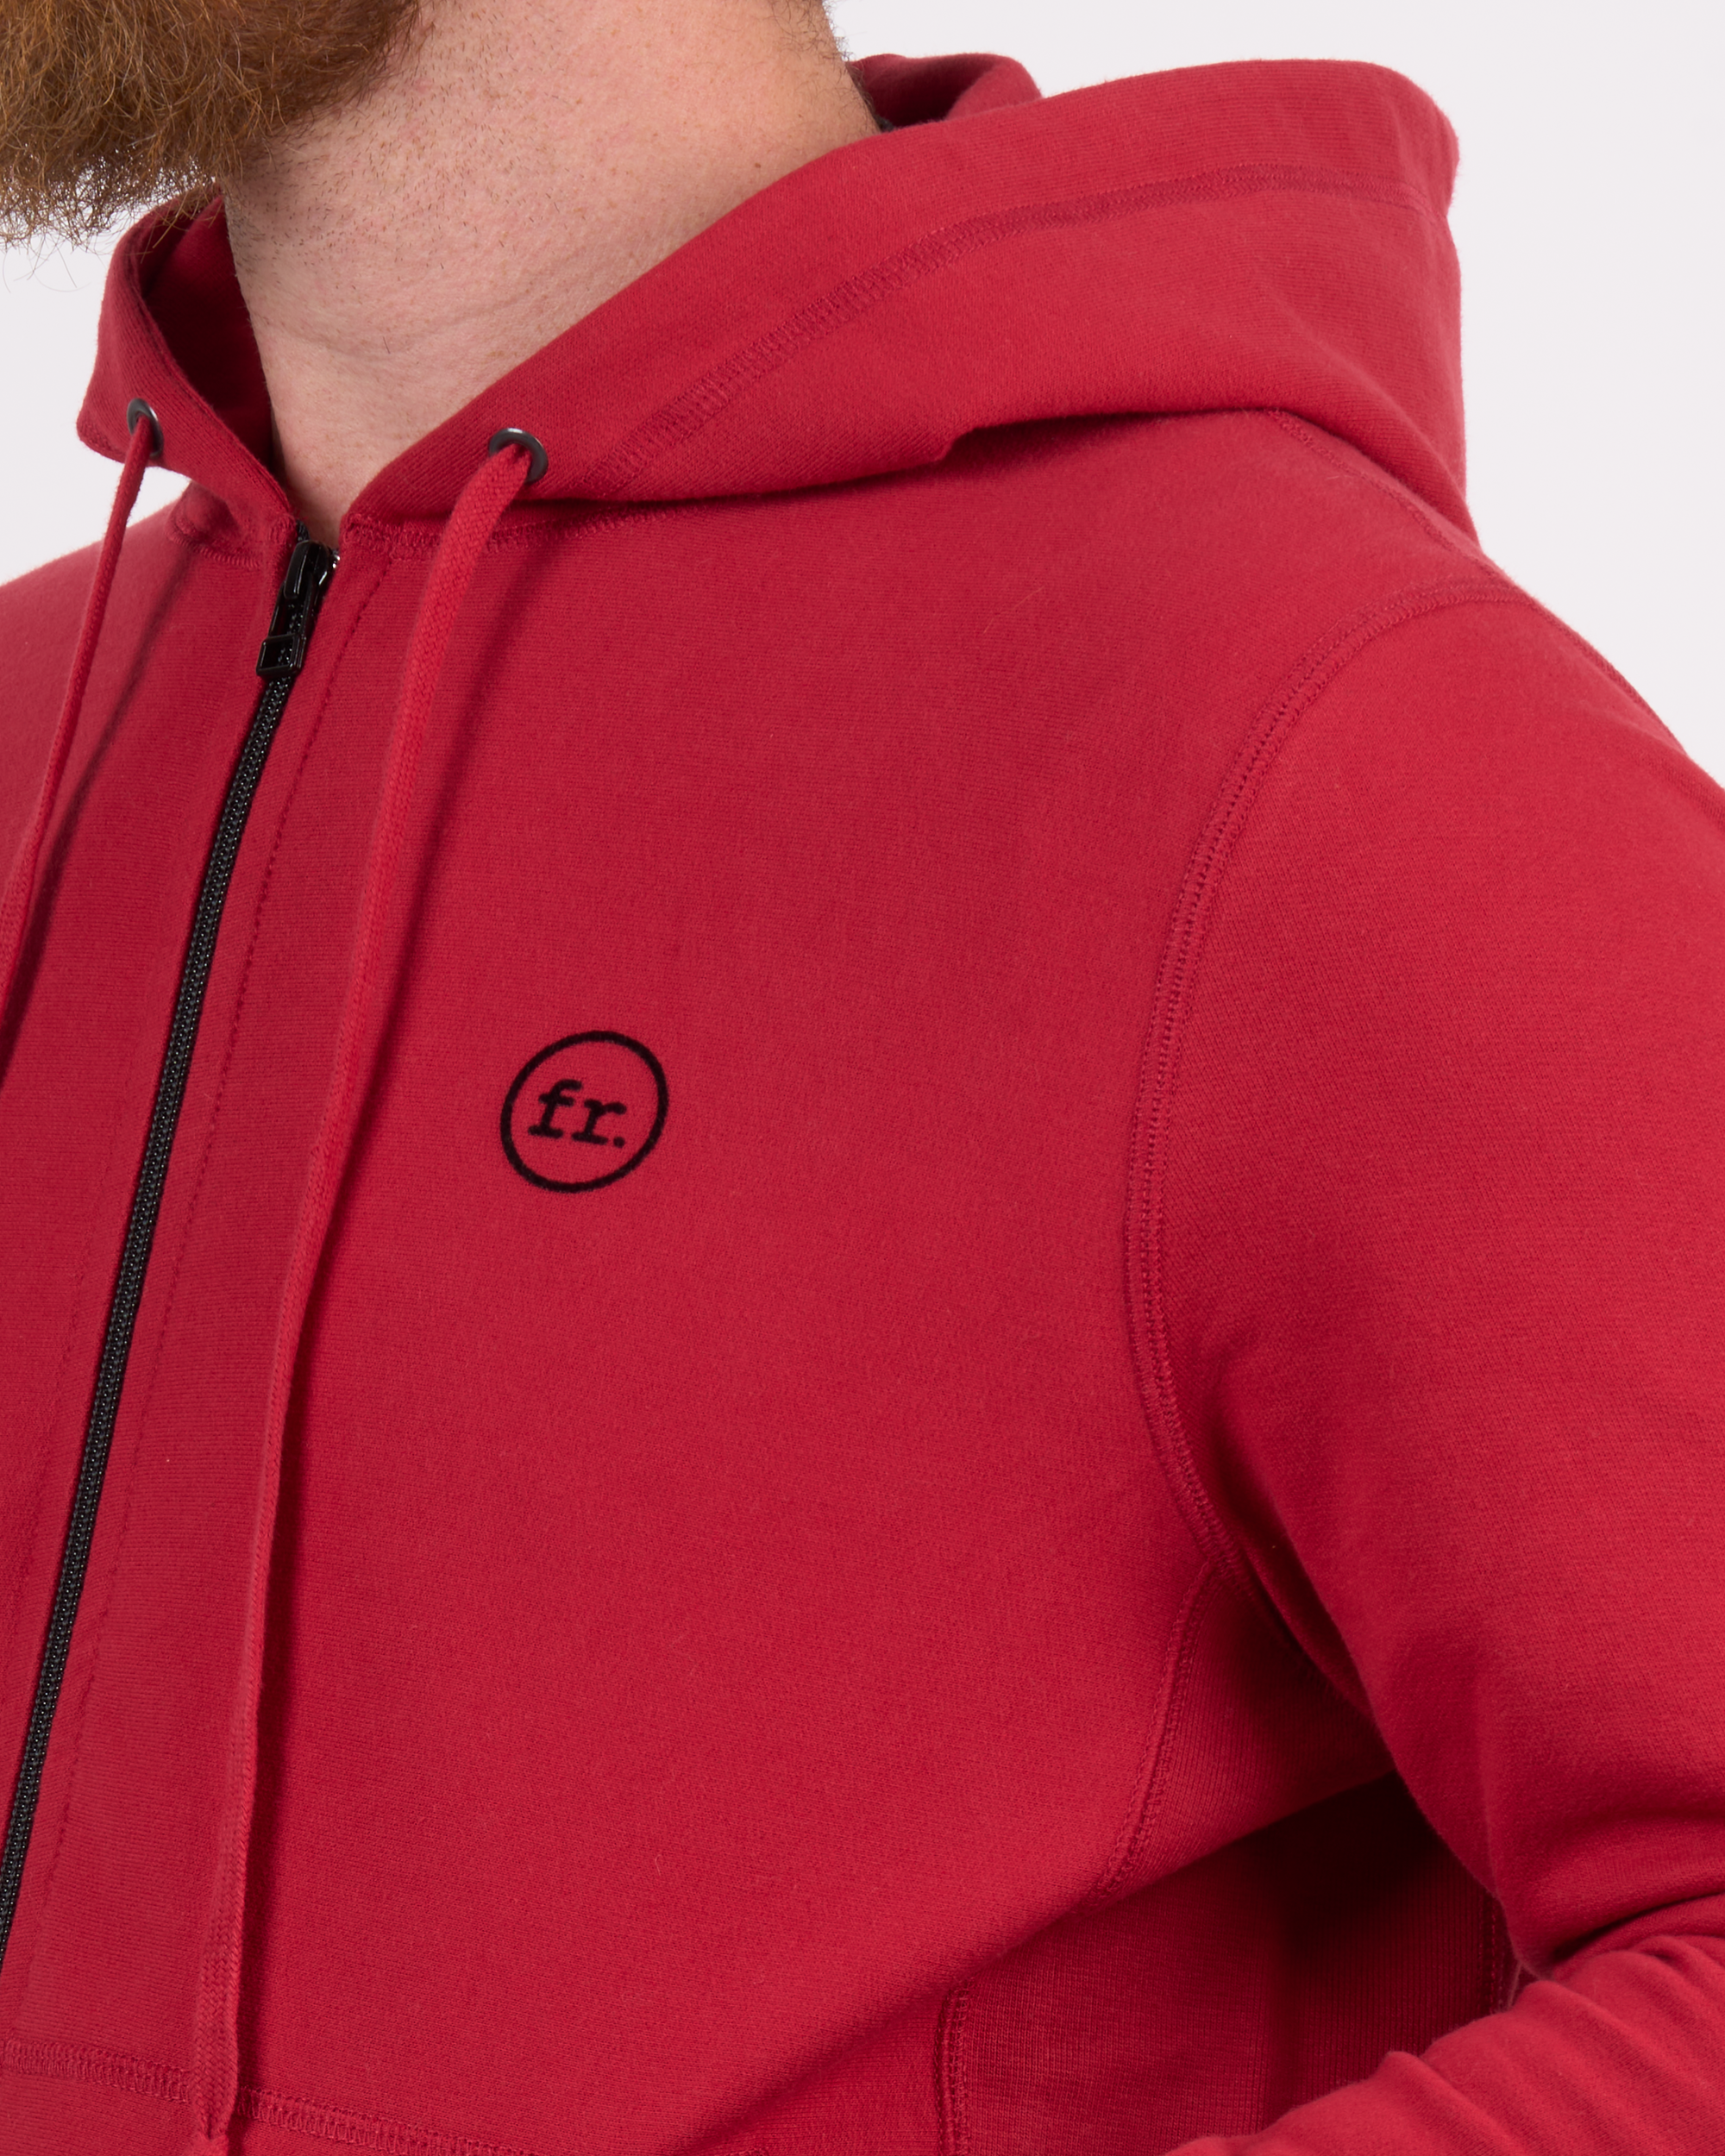 Foreign Rider Co Cotton Red Left Chest FR Logo Zip Hoodie Chest Detail